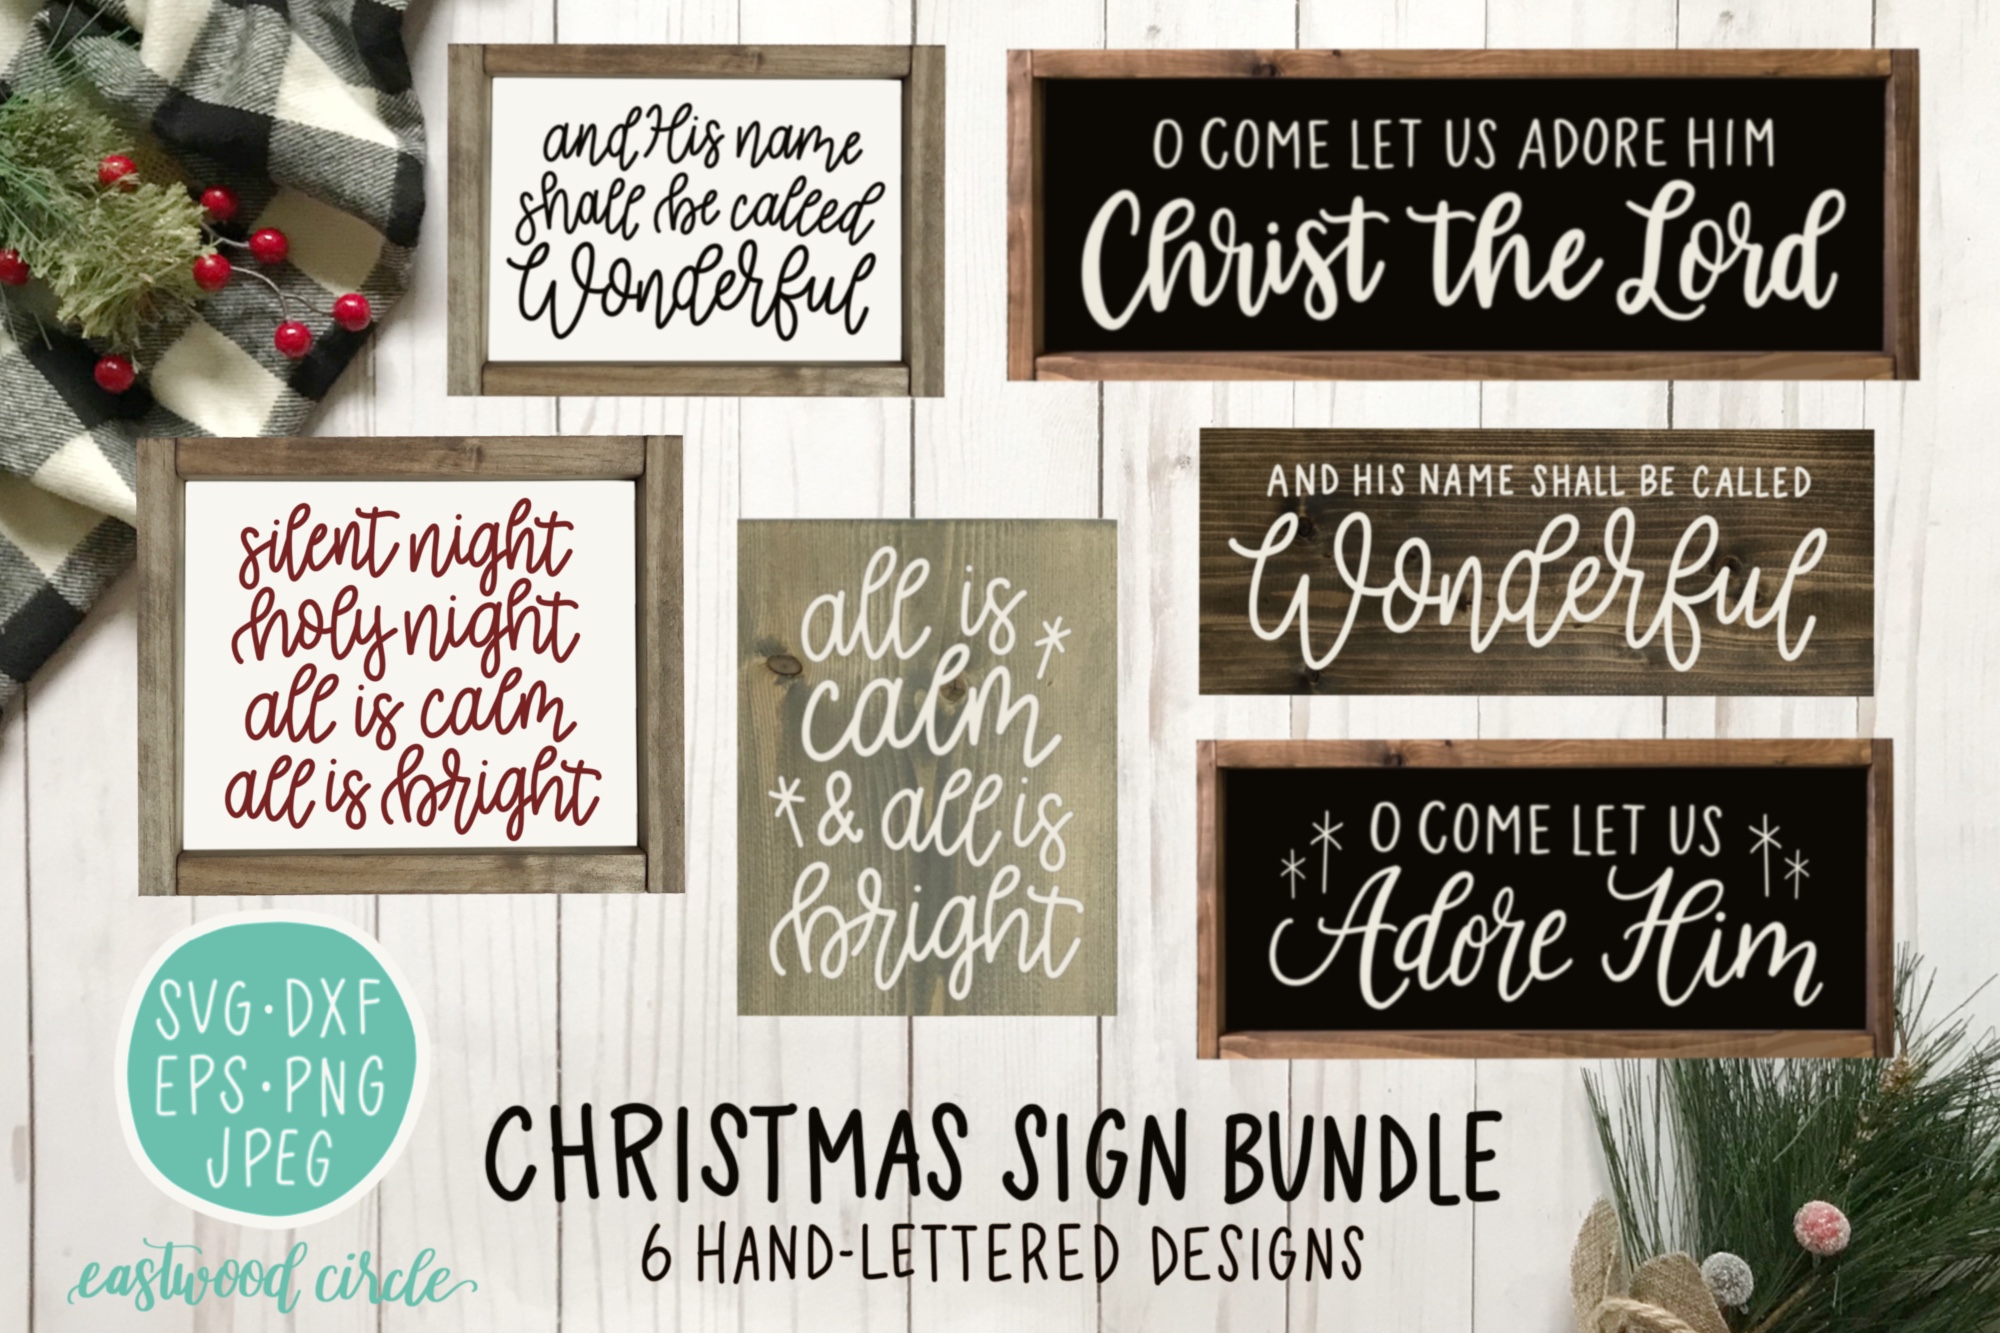 Download Christmas SVG Bundle - Hand Lettered Cut Files for Signs